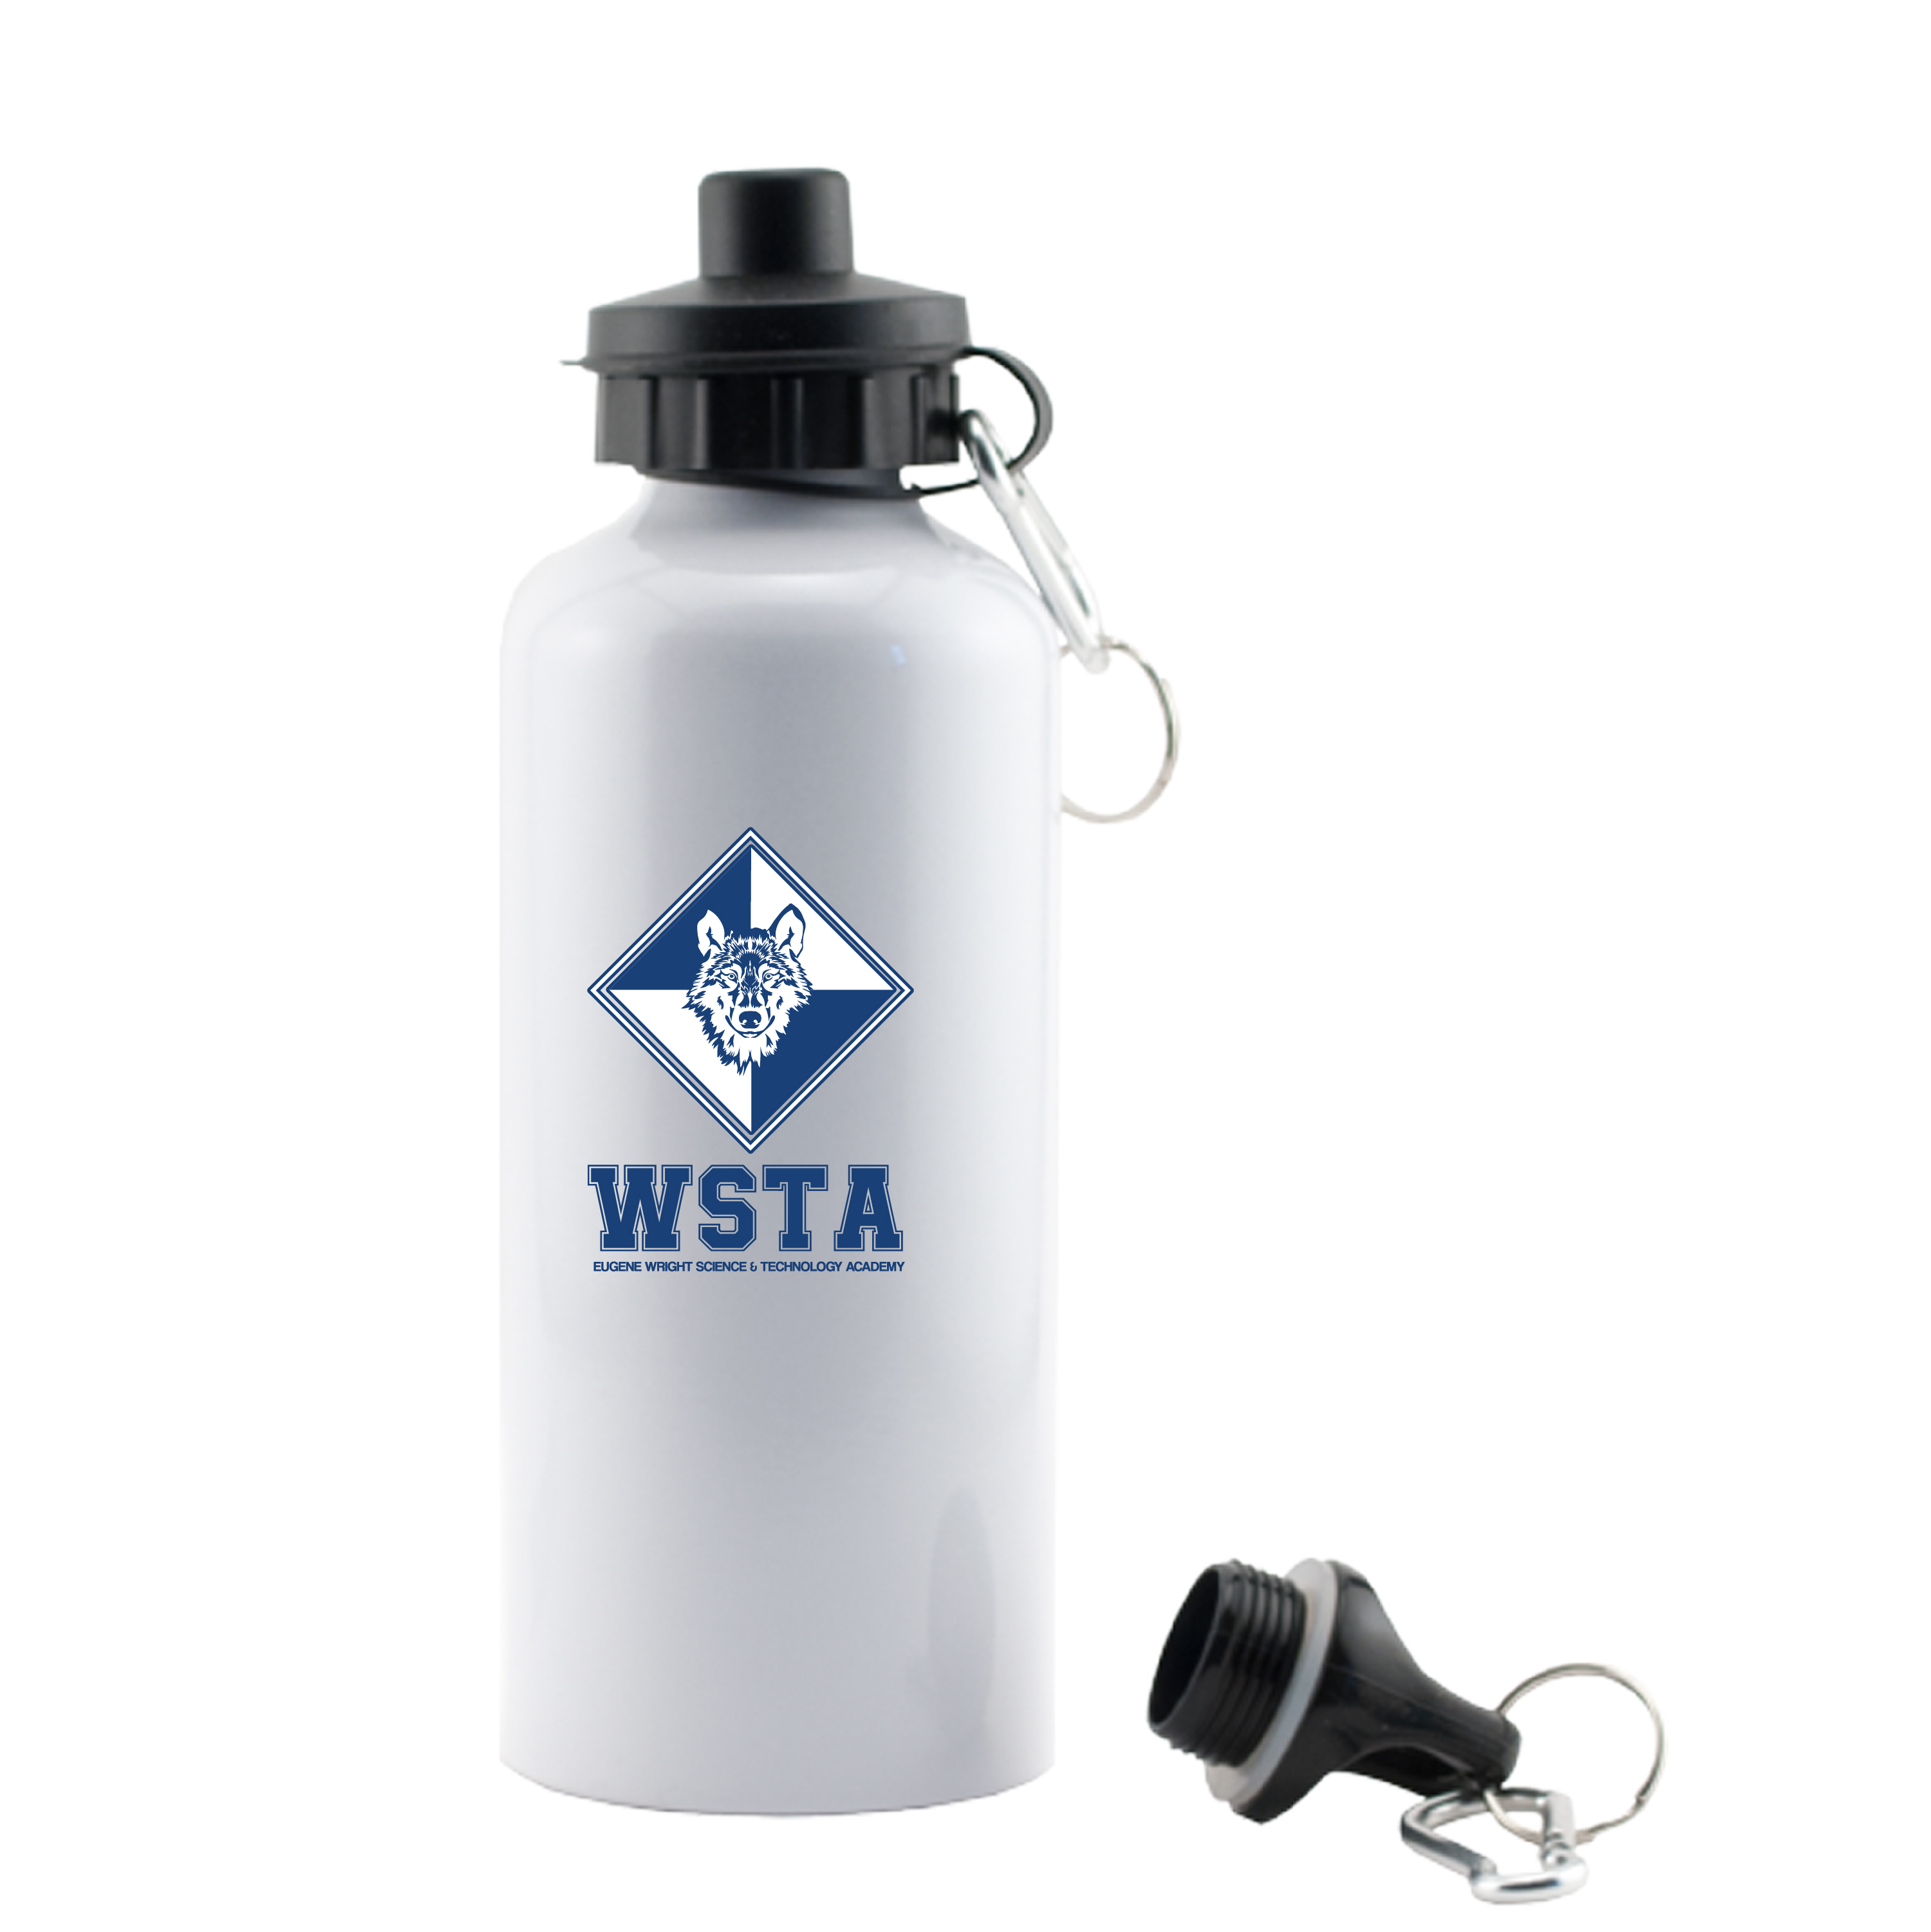 Wright Science & Technology Academy SUBLIMATION ALUMINUM WATER BOTTLE